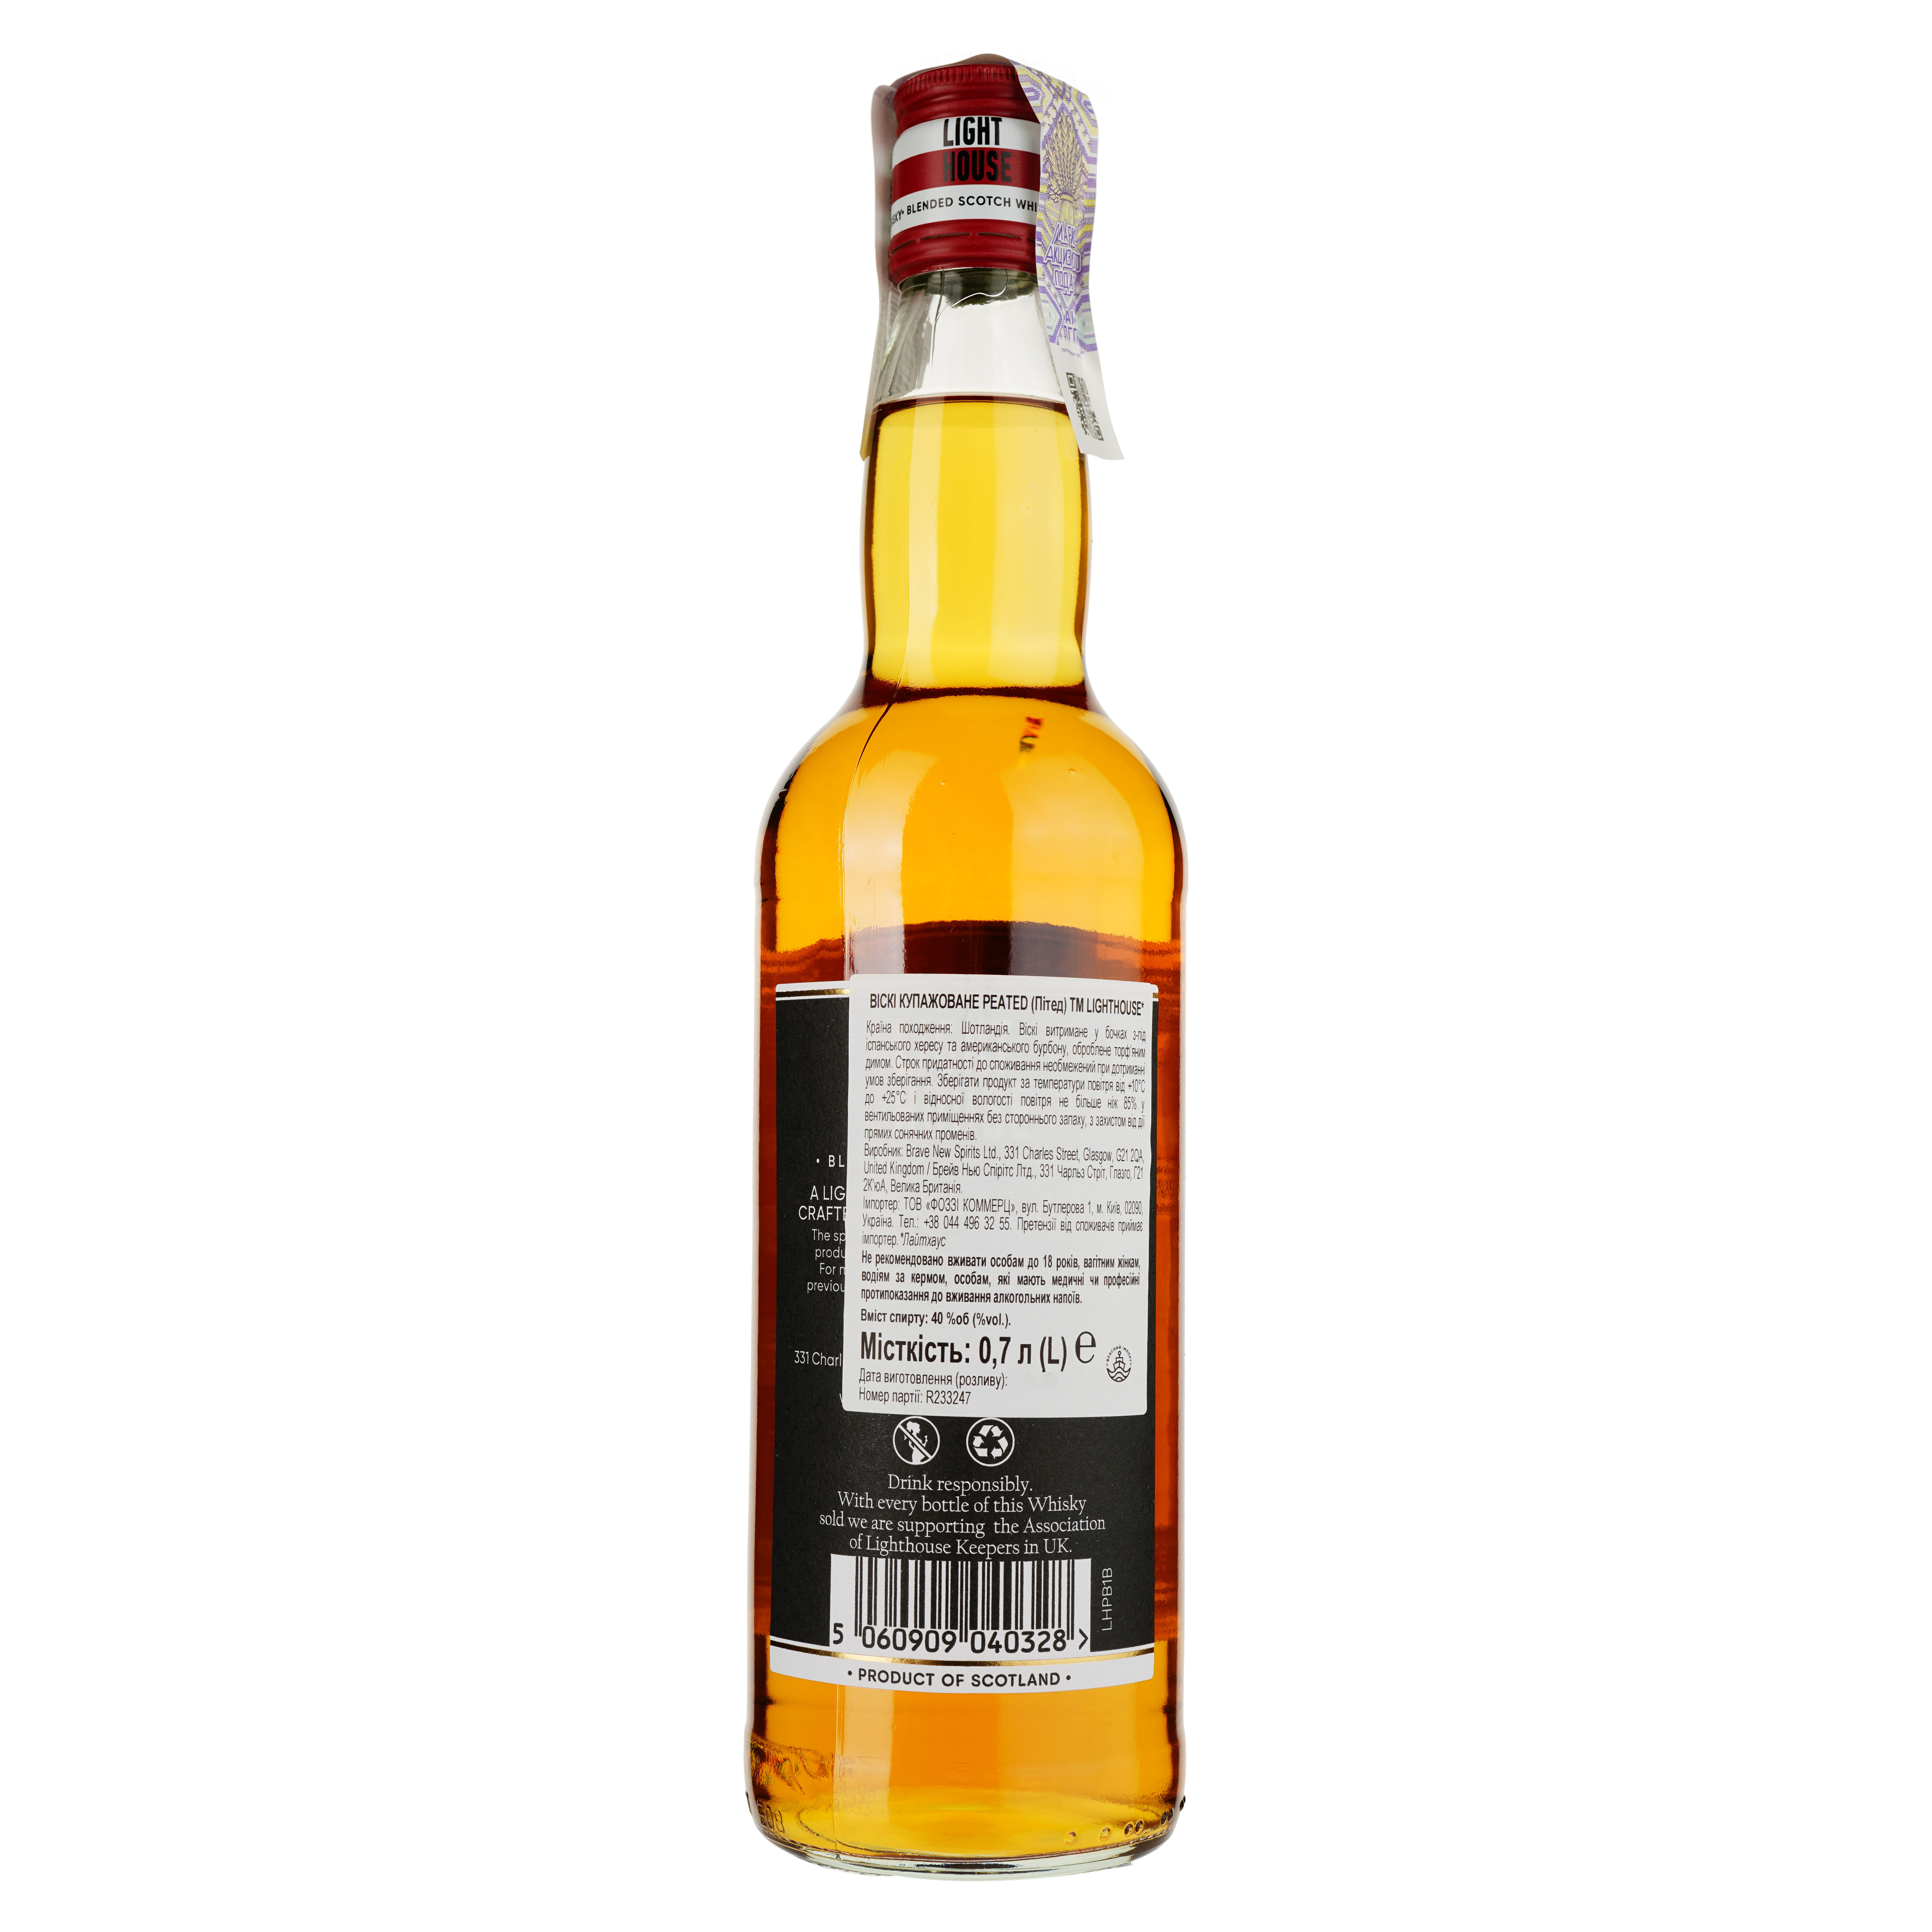 Виски Lighthouse Blended Scotch Whisky Peated 40% 0.7 л - фото 2